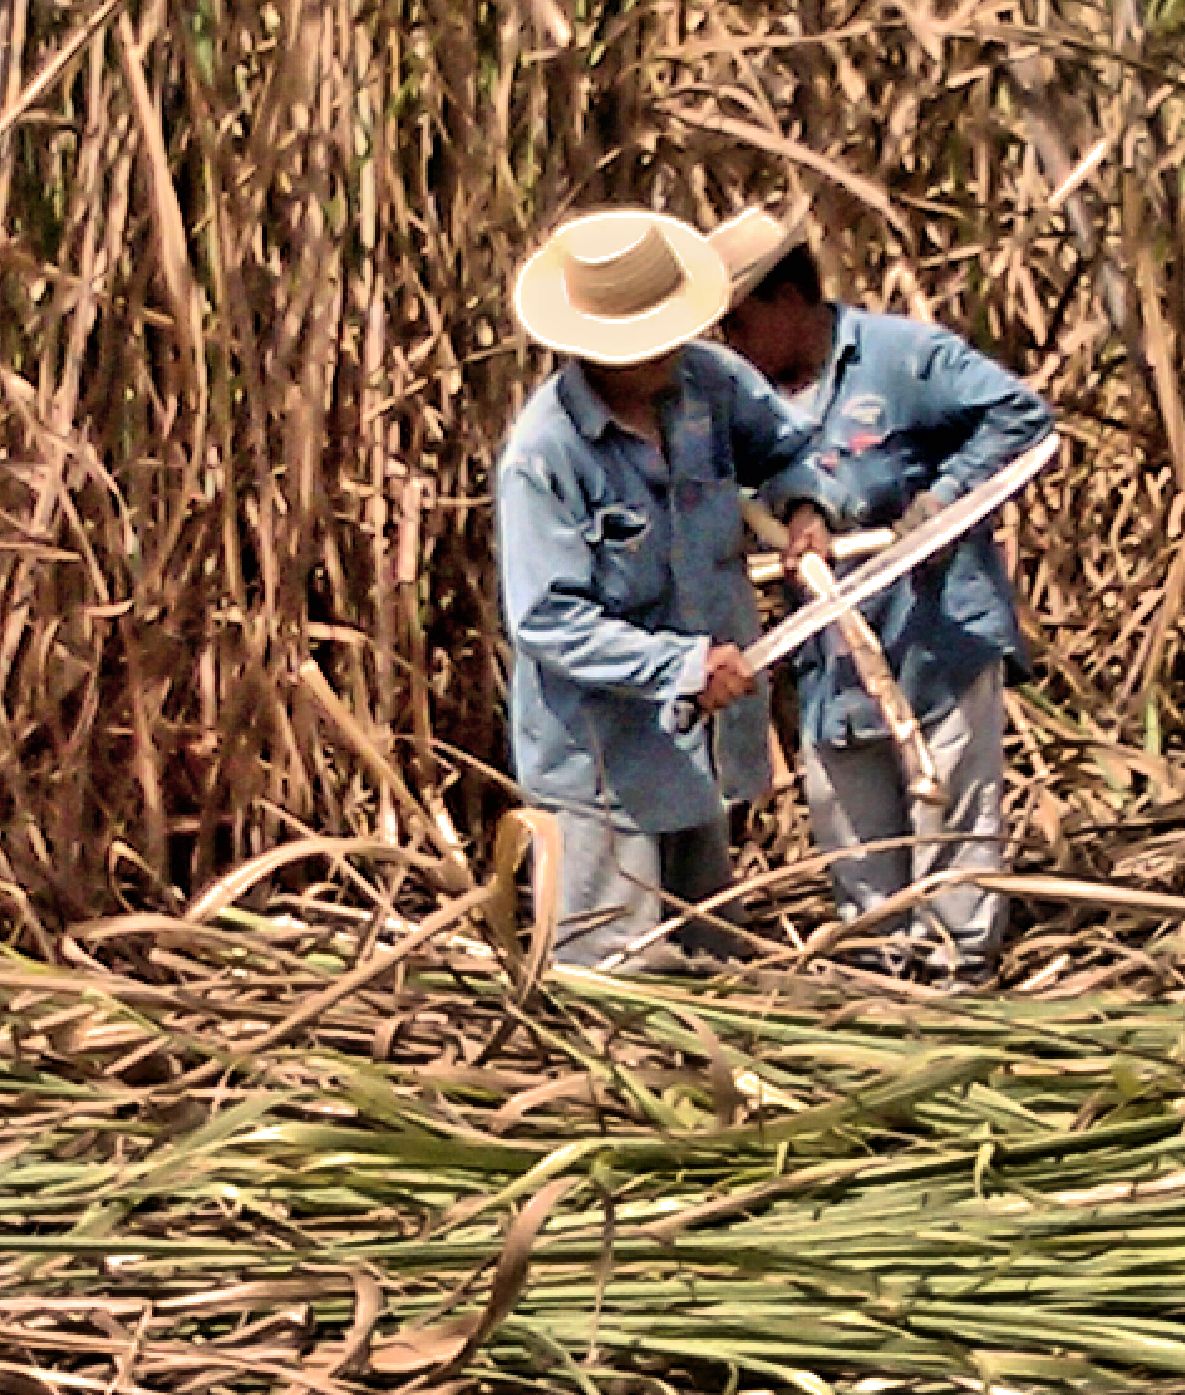 Where does sugar cane come from?